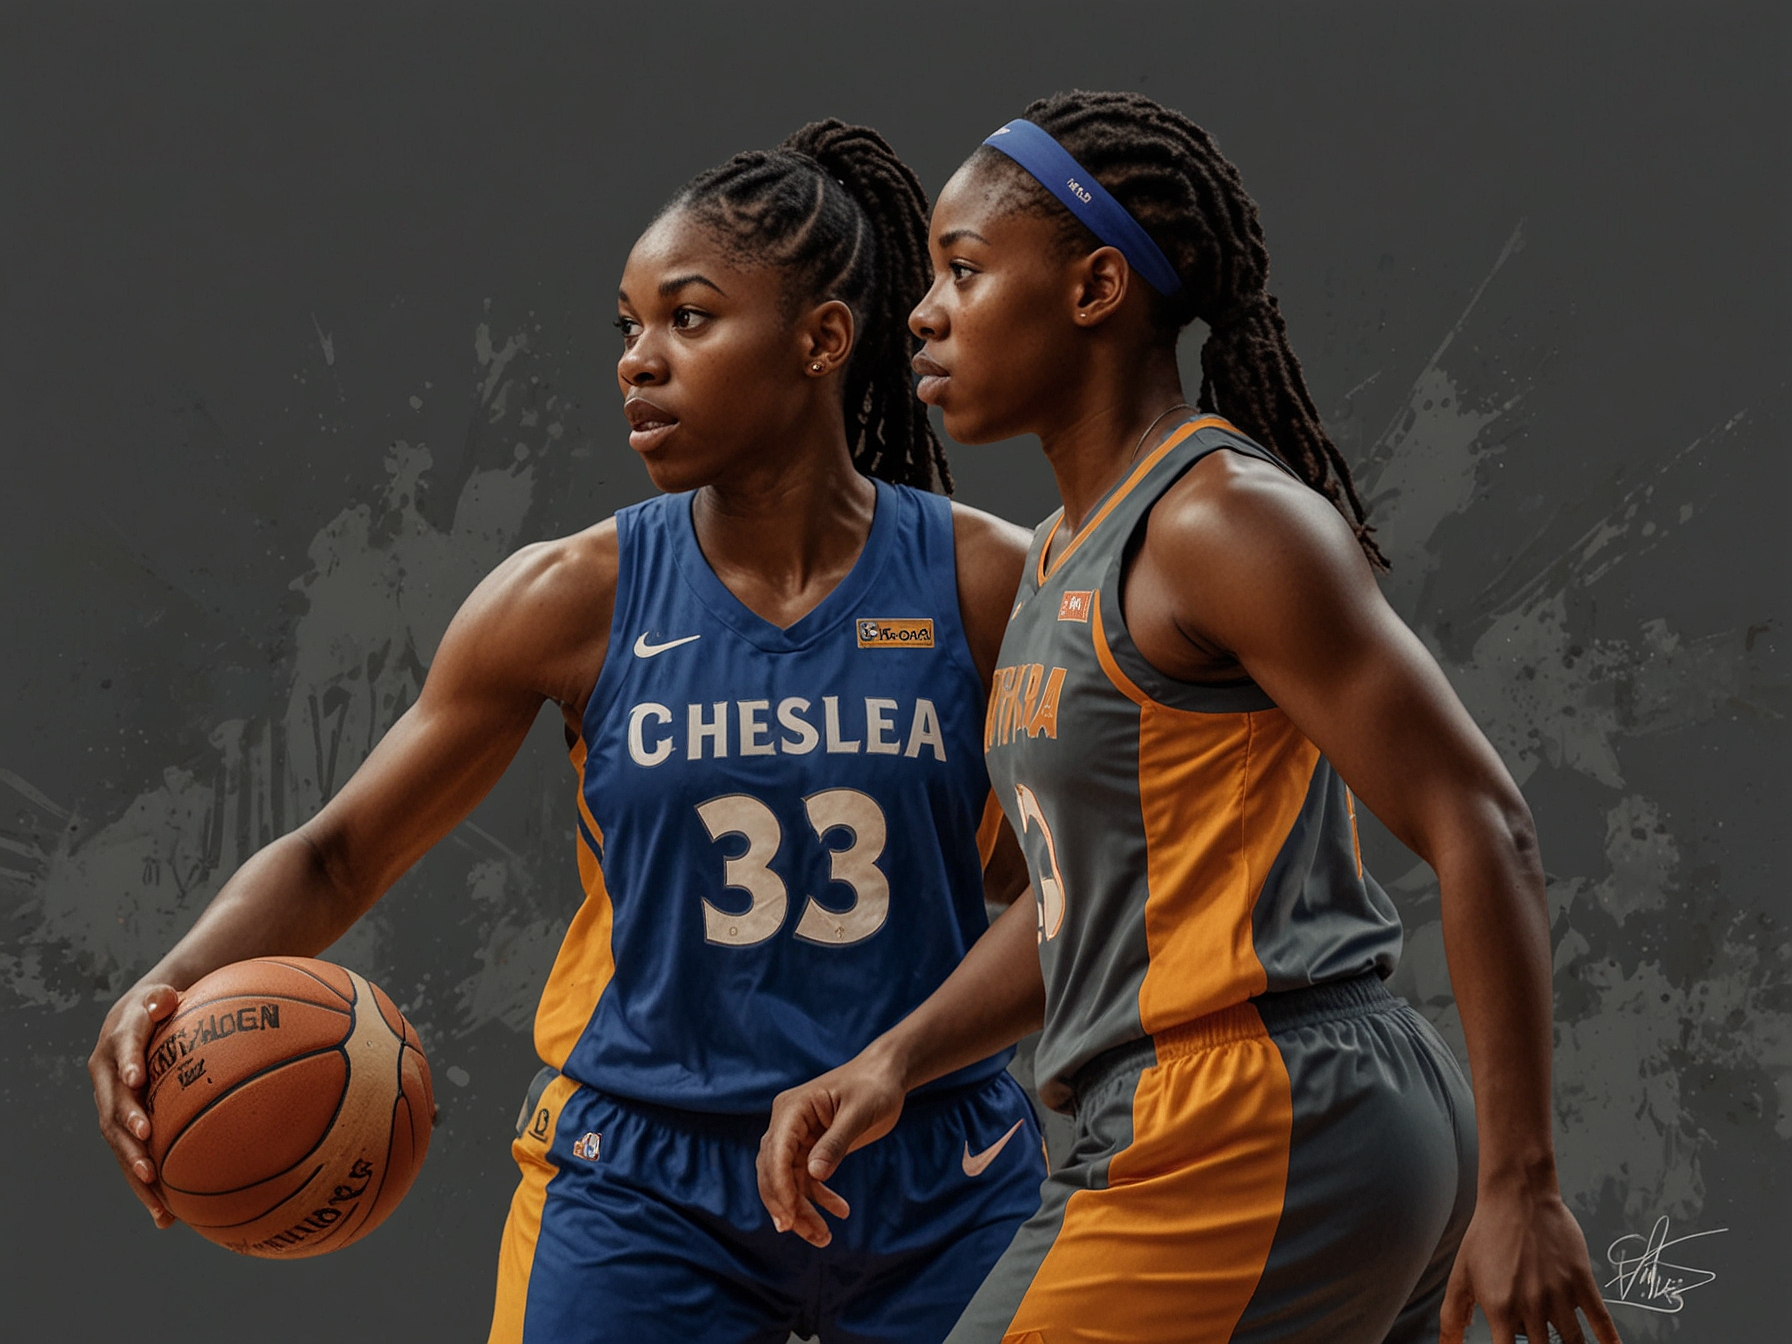 Star players Chelsea Gray and Jonquel Jones facing off in a pivotal WNBA matchup, showcasing top-tier professional basketball talent and strategy.